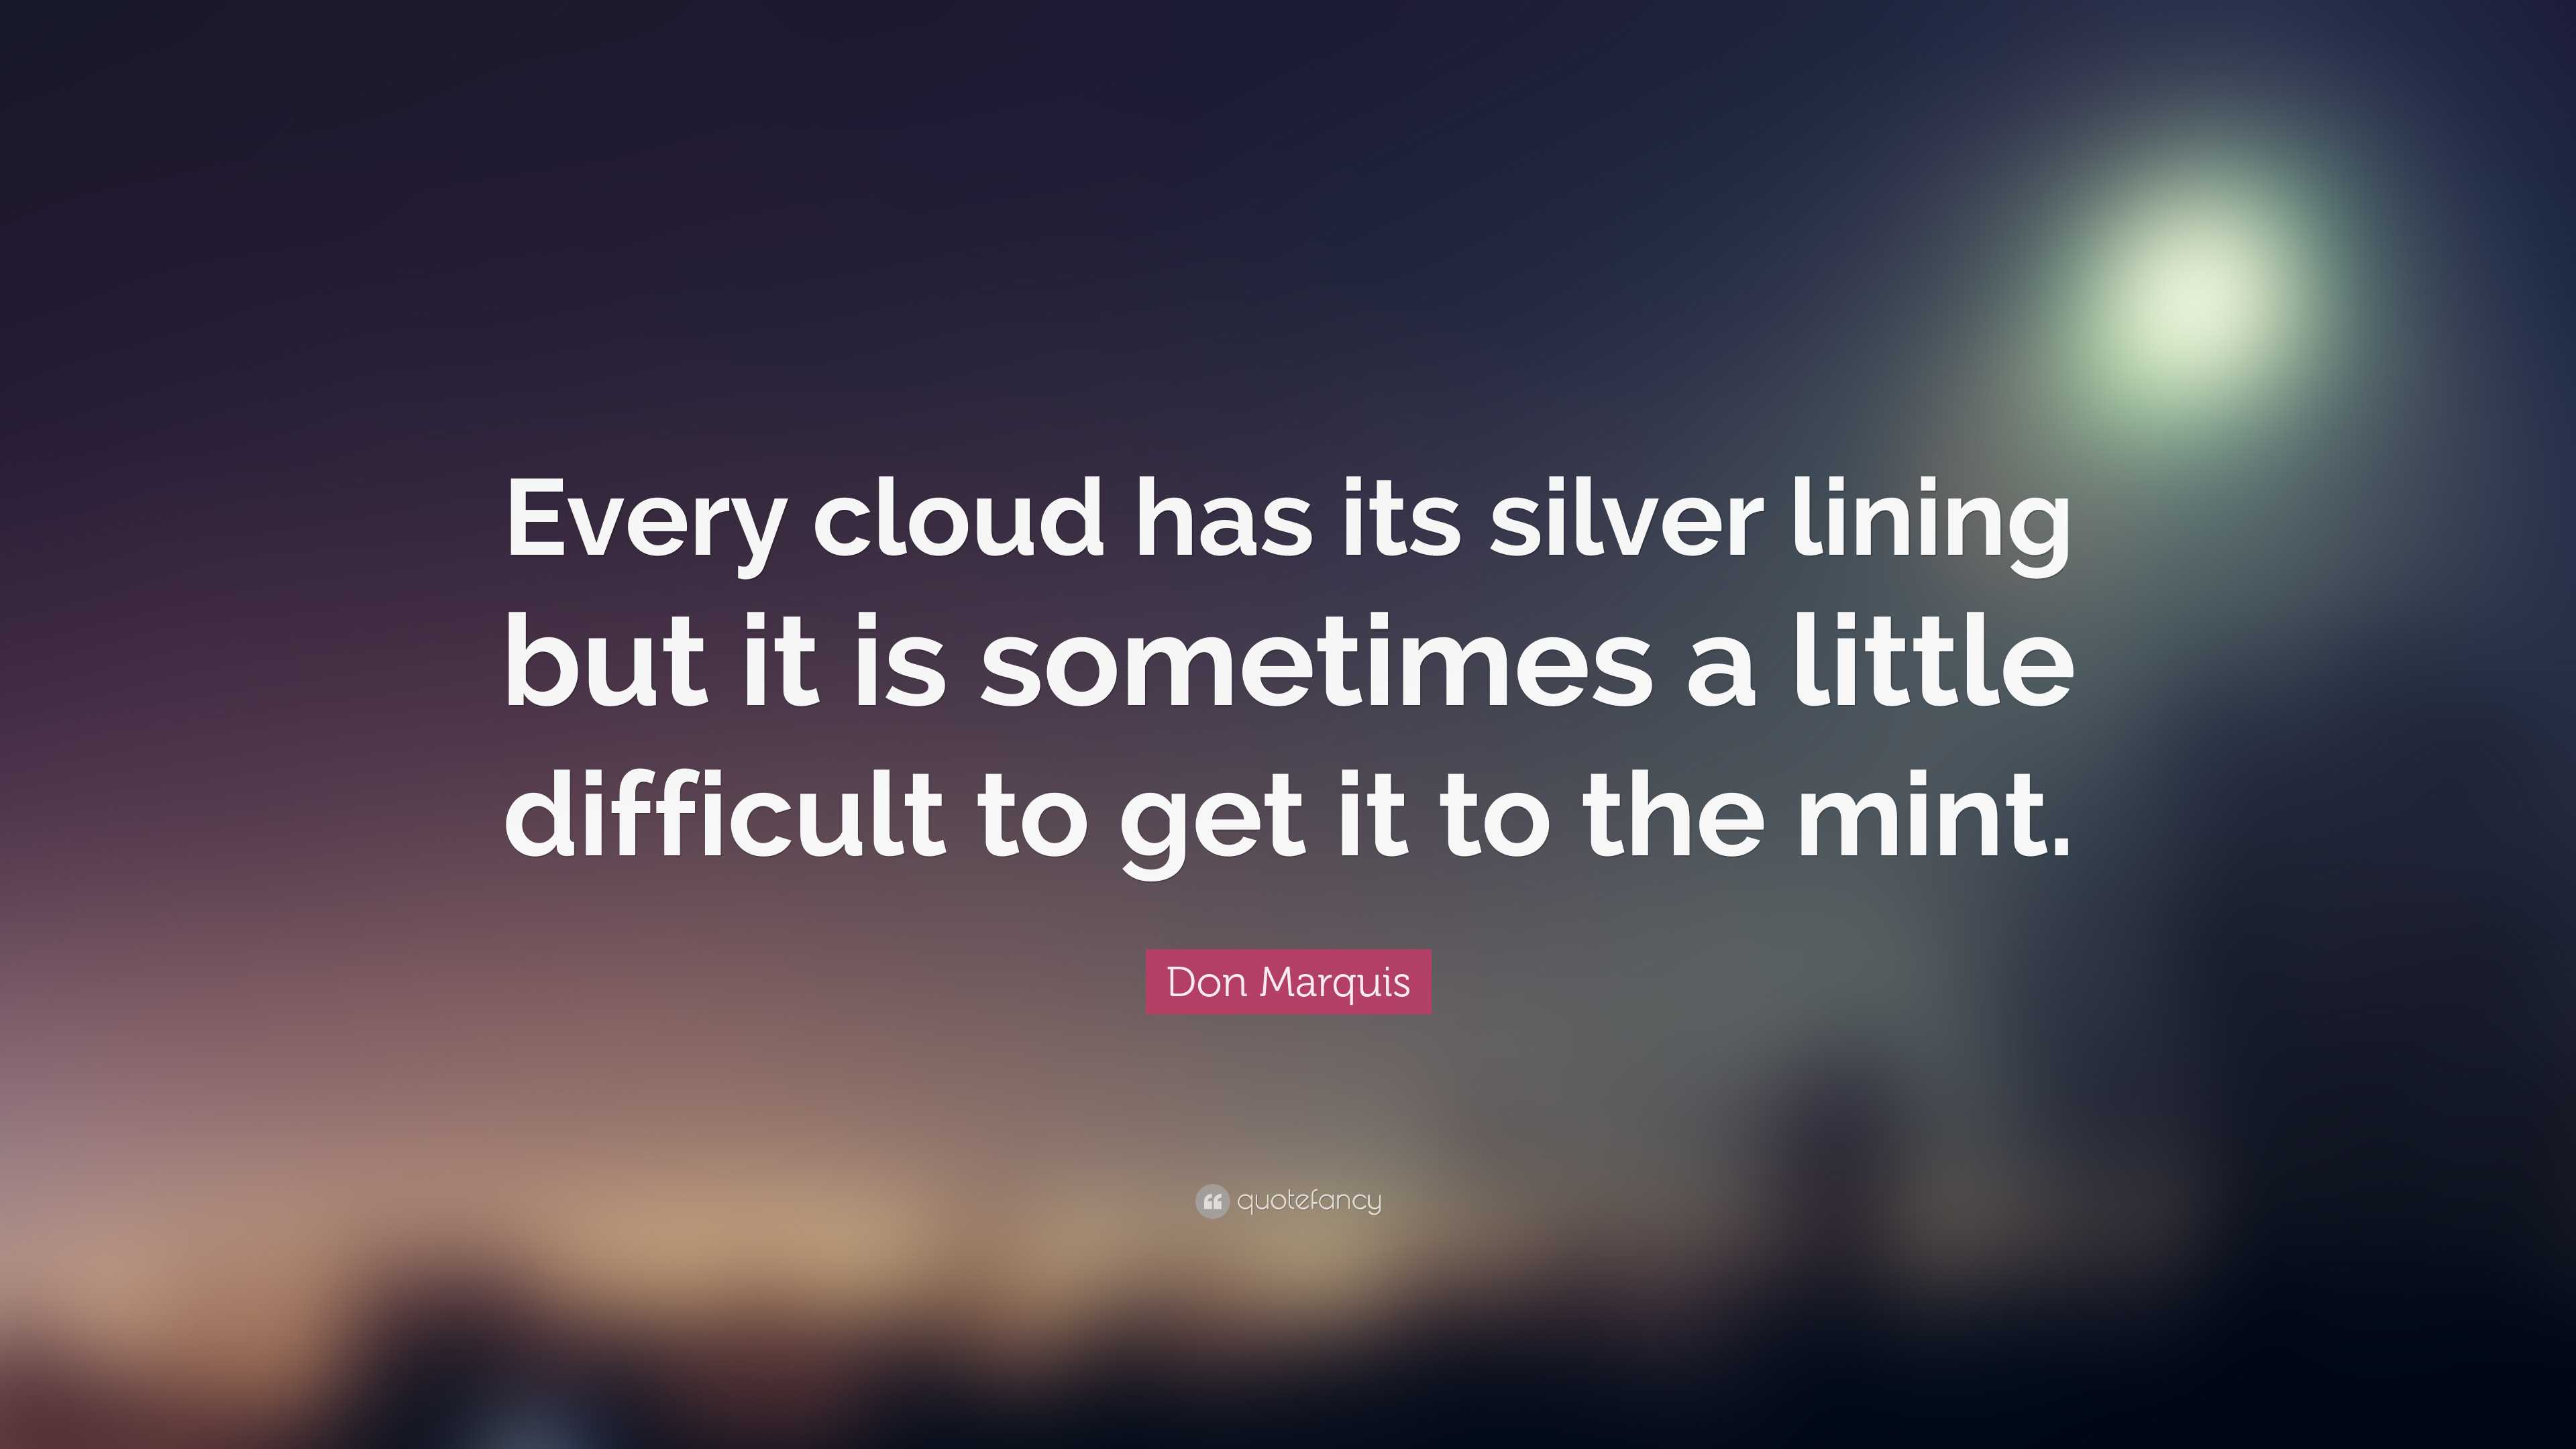 Every Cloud Has a Silver Lining - What Are We Willing to Keep